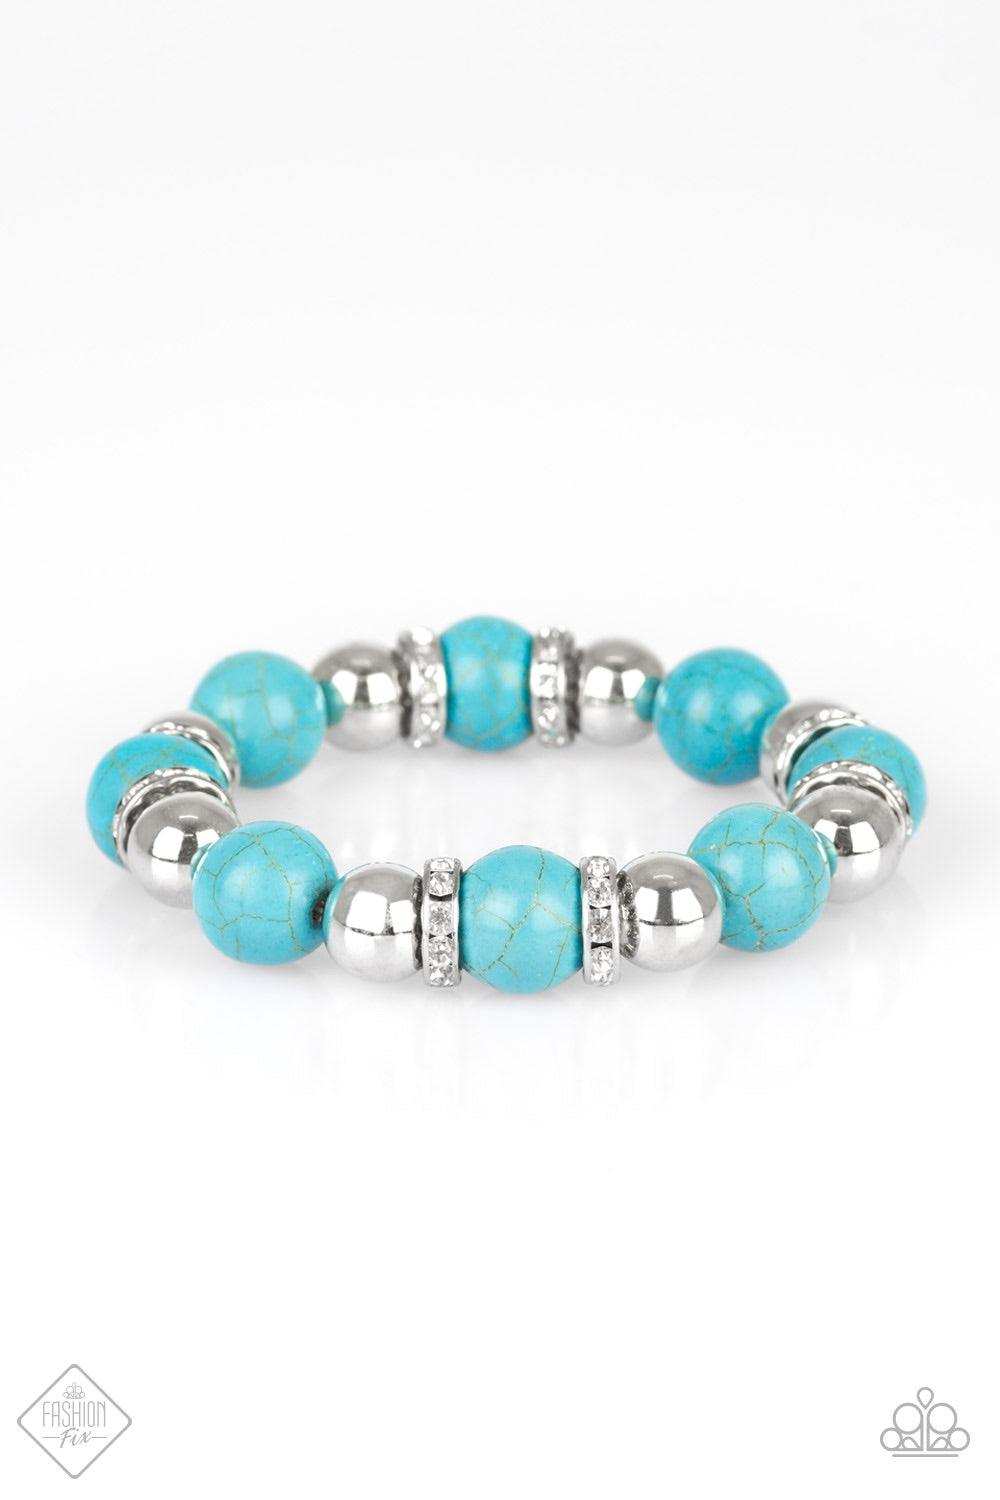 Paparazzi Accessories Ruling Class Radiance - Blue Faux turquoise stones, shiny silver beads, and white rhinestone encrusted rings are threaded along a stretchy band and wrapped around the wrist for an elegantly earthy finish. Jewelry